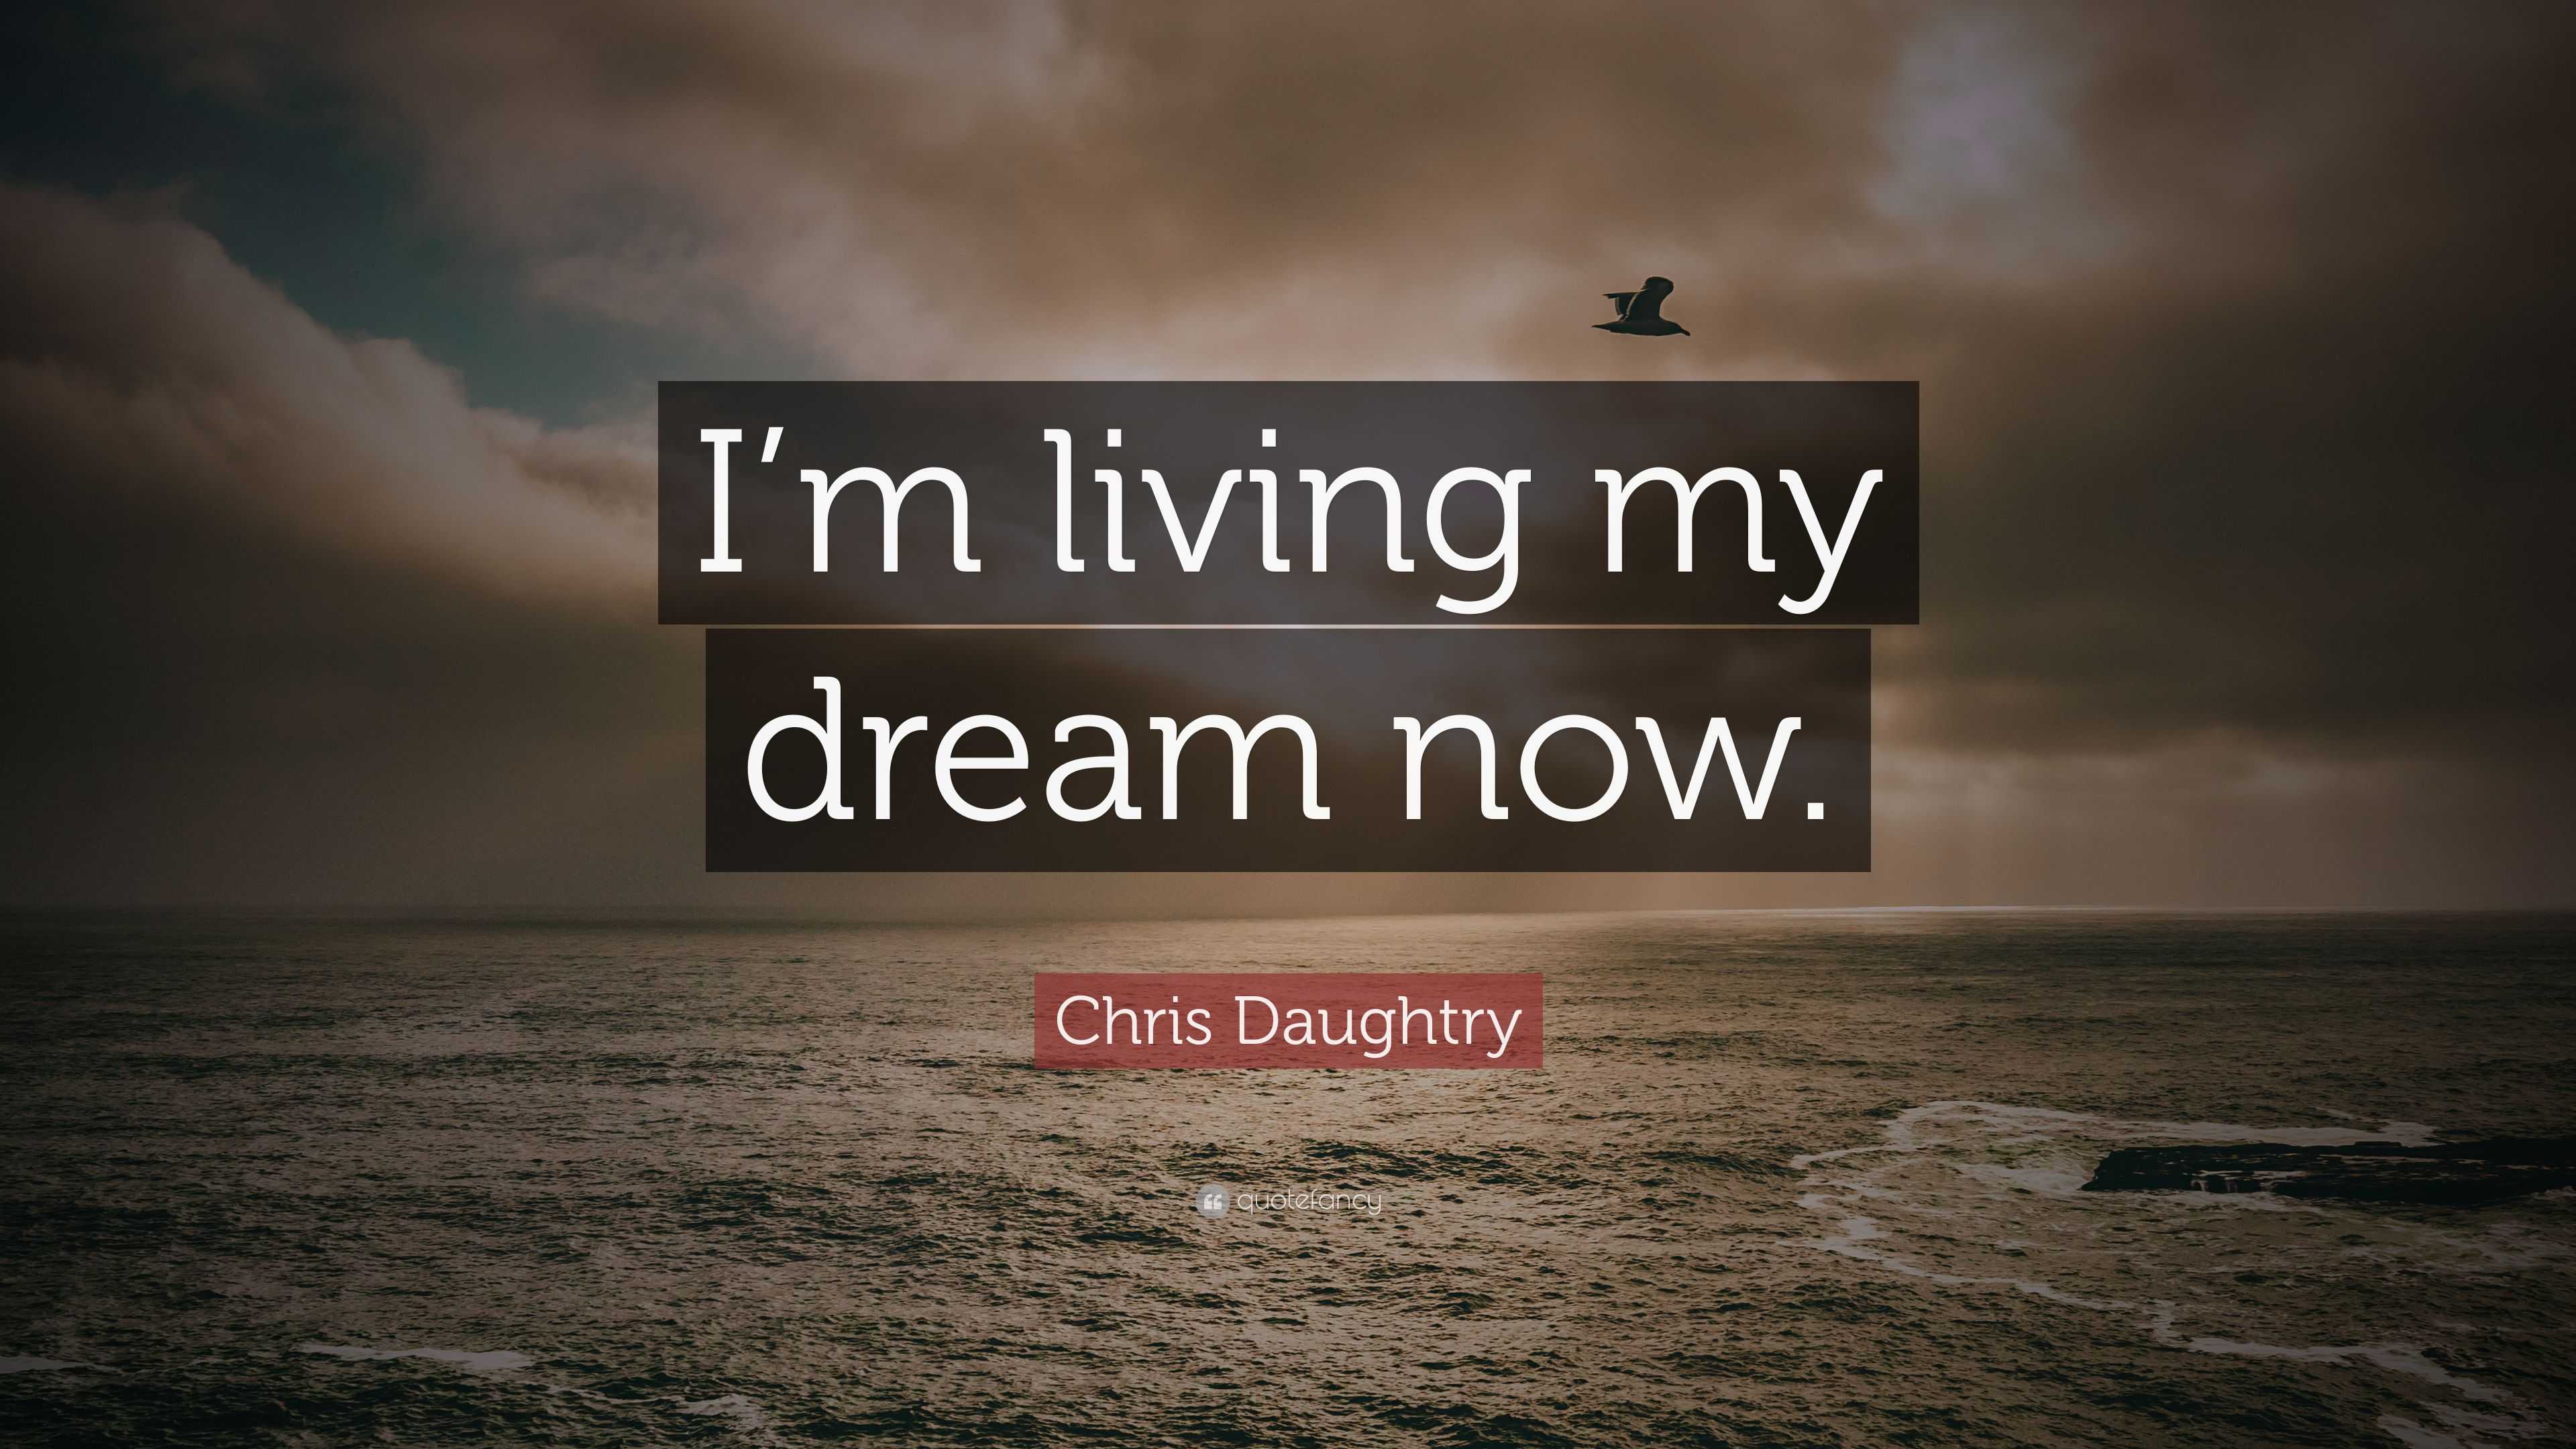 Chris Daughtry Quote: “I’m living my dream now.”